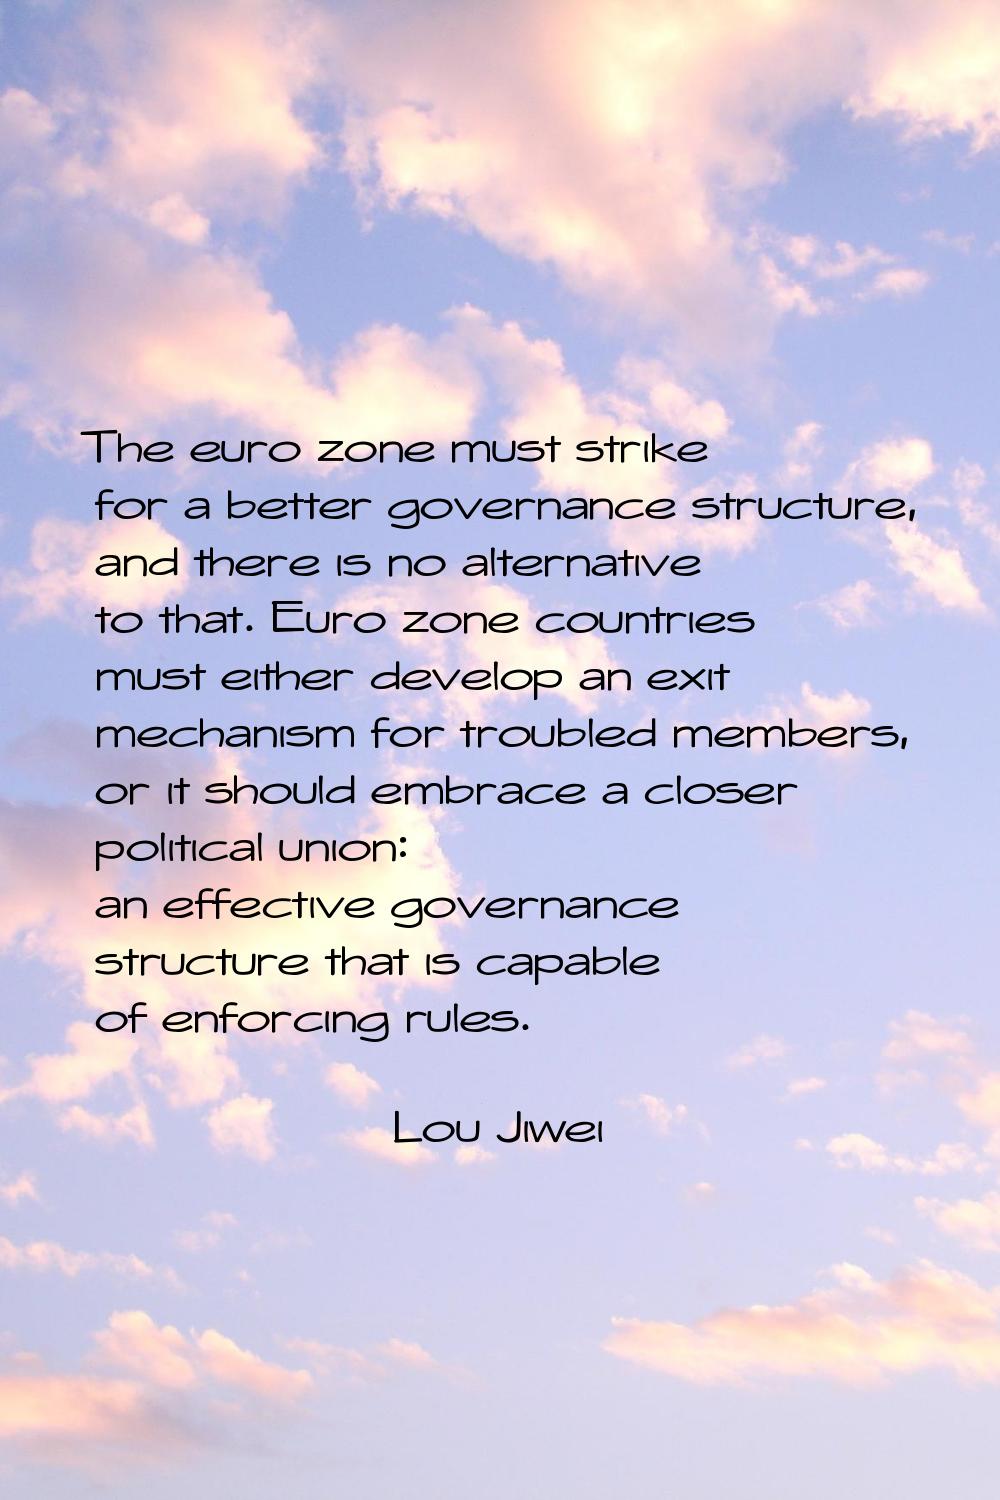 The euro zone must strike for a better governance structure, and there is no alternative to that. E